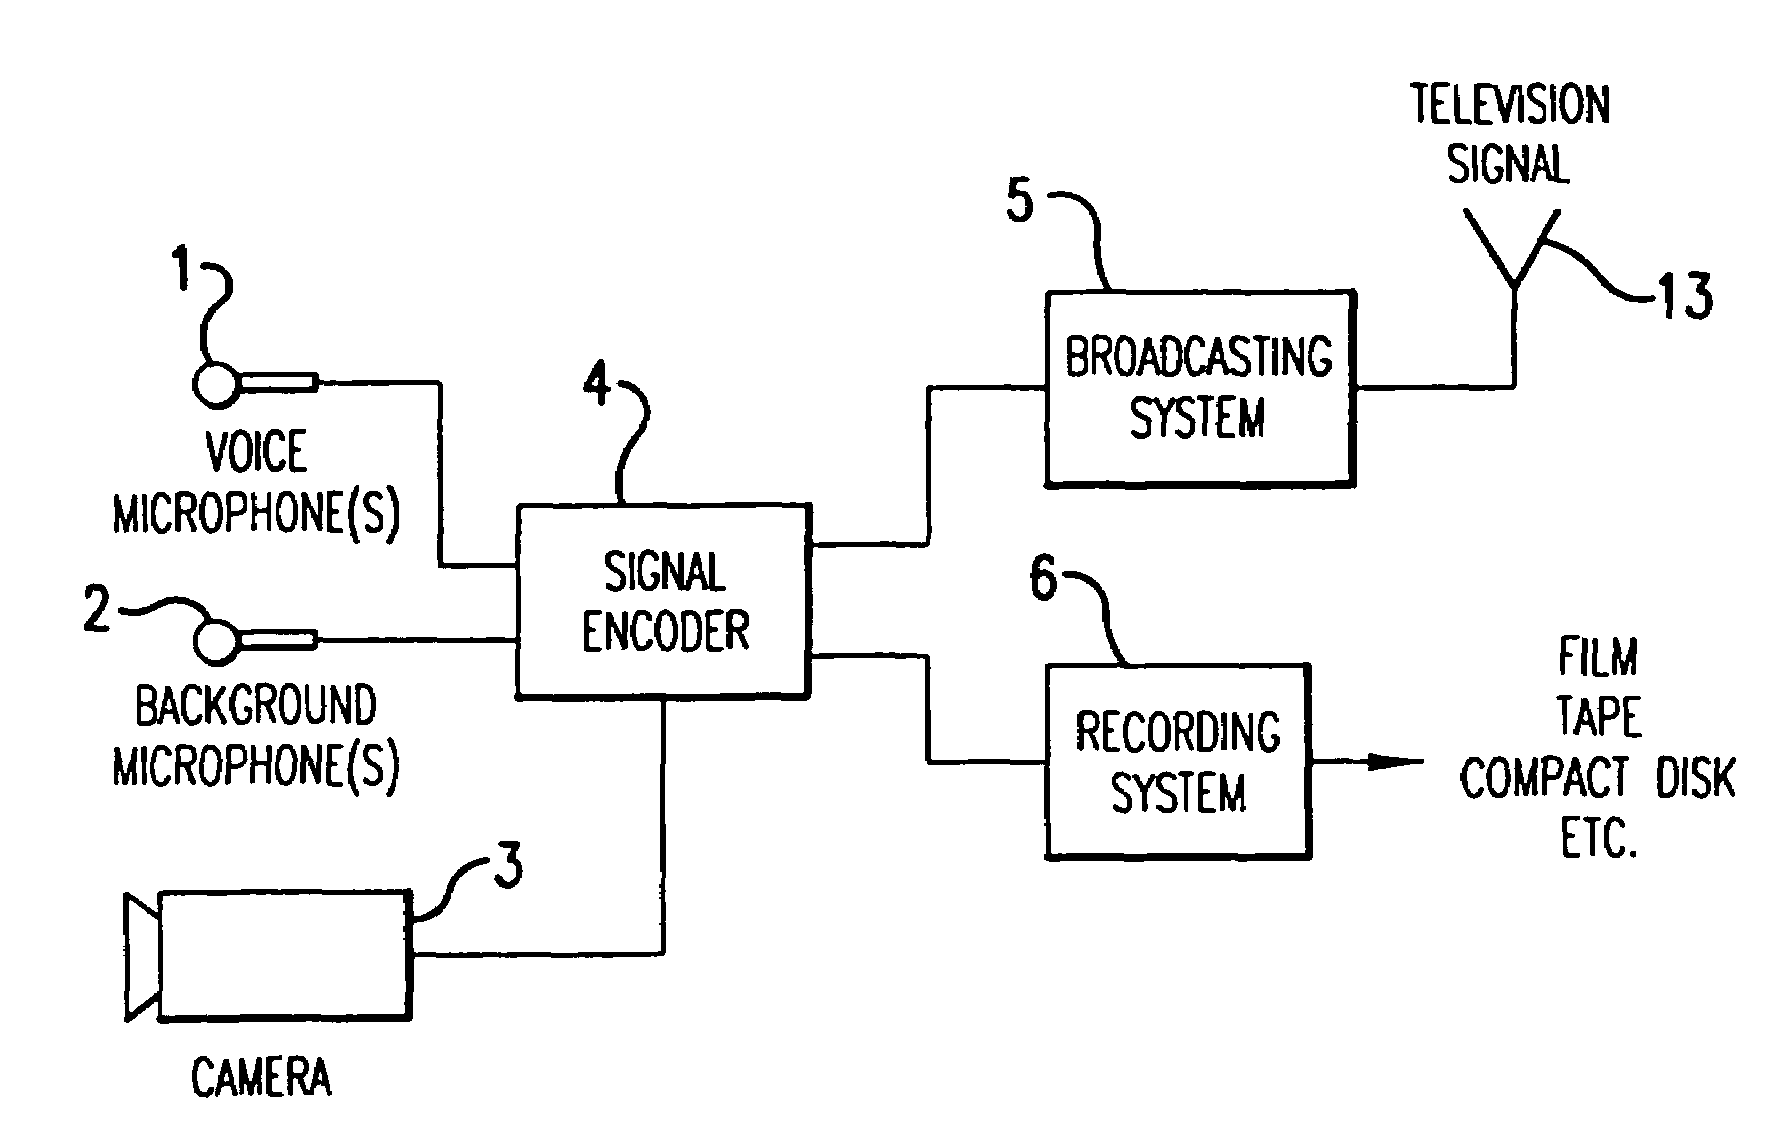 User adjustable volume control that accommodates hearing